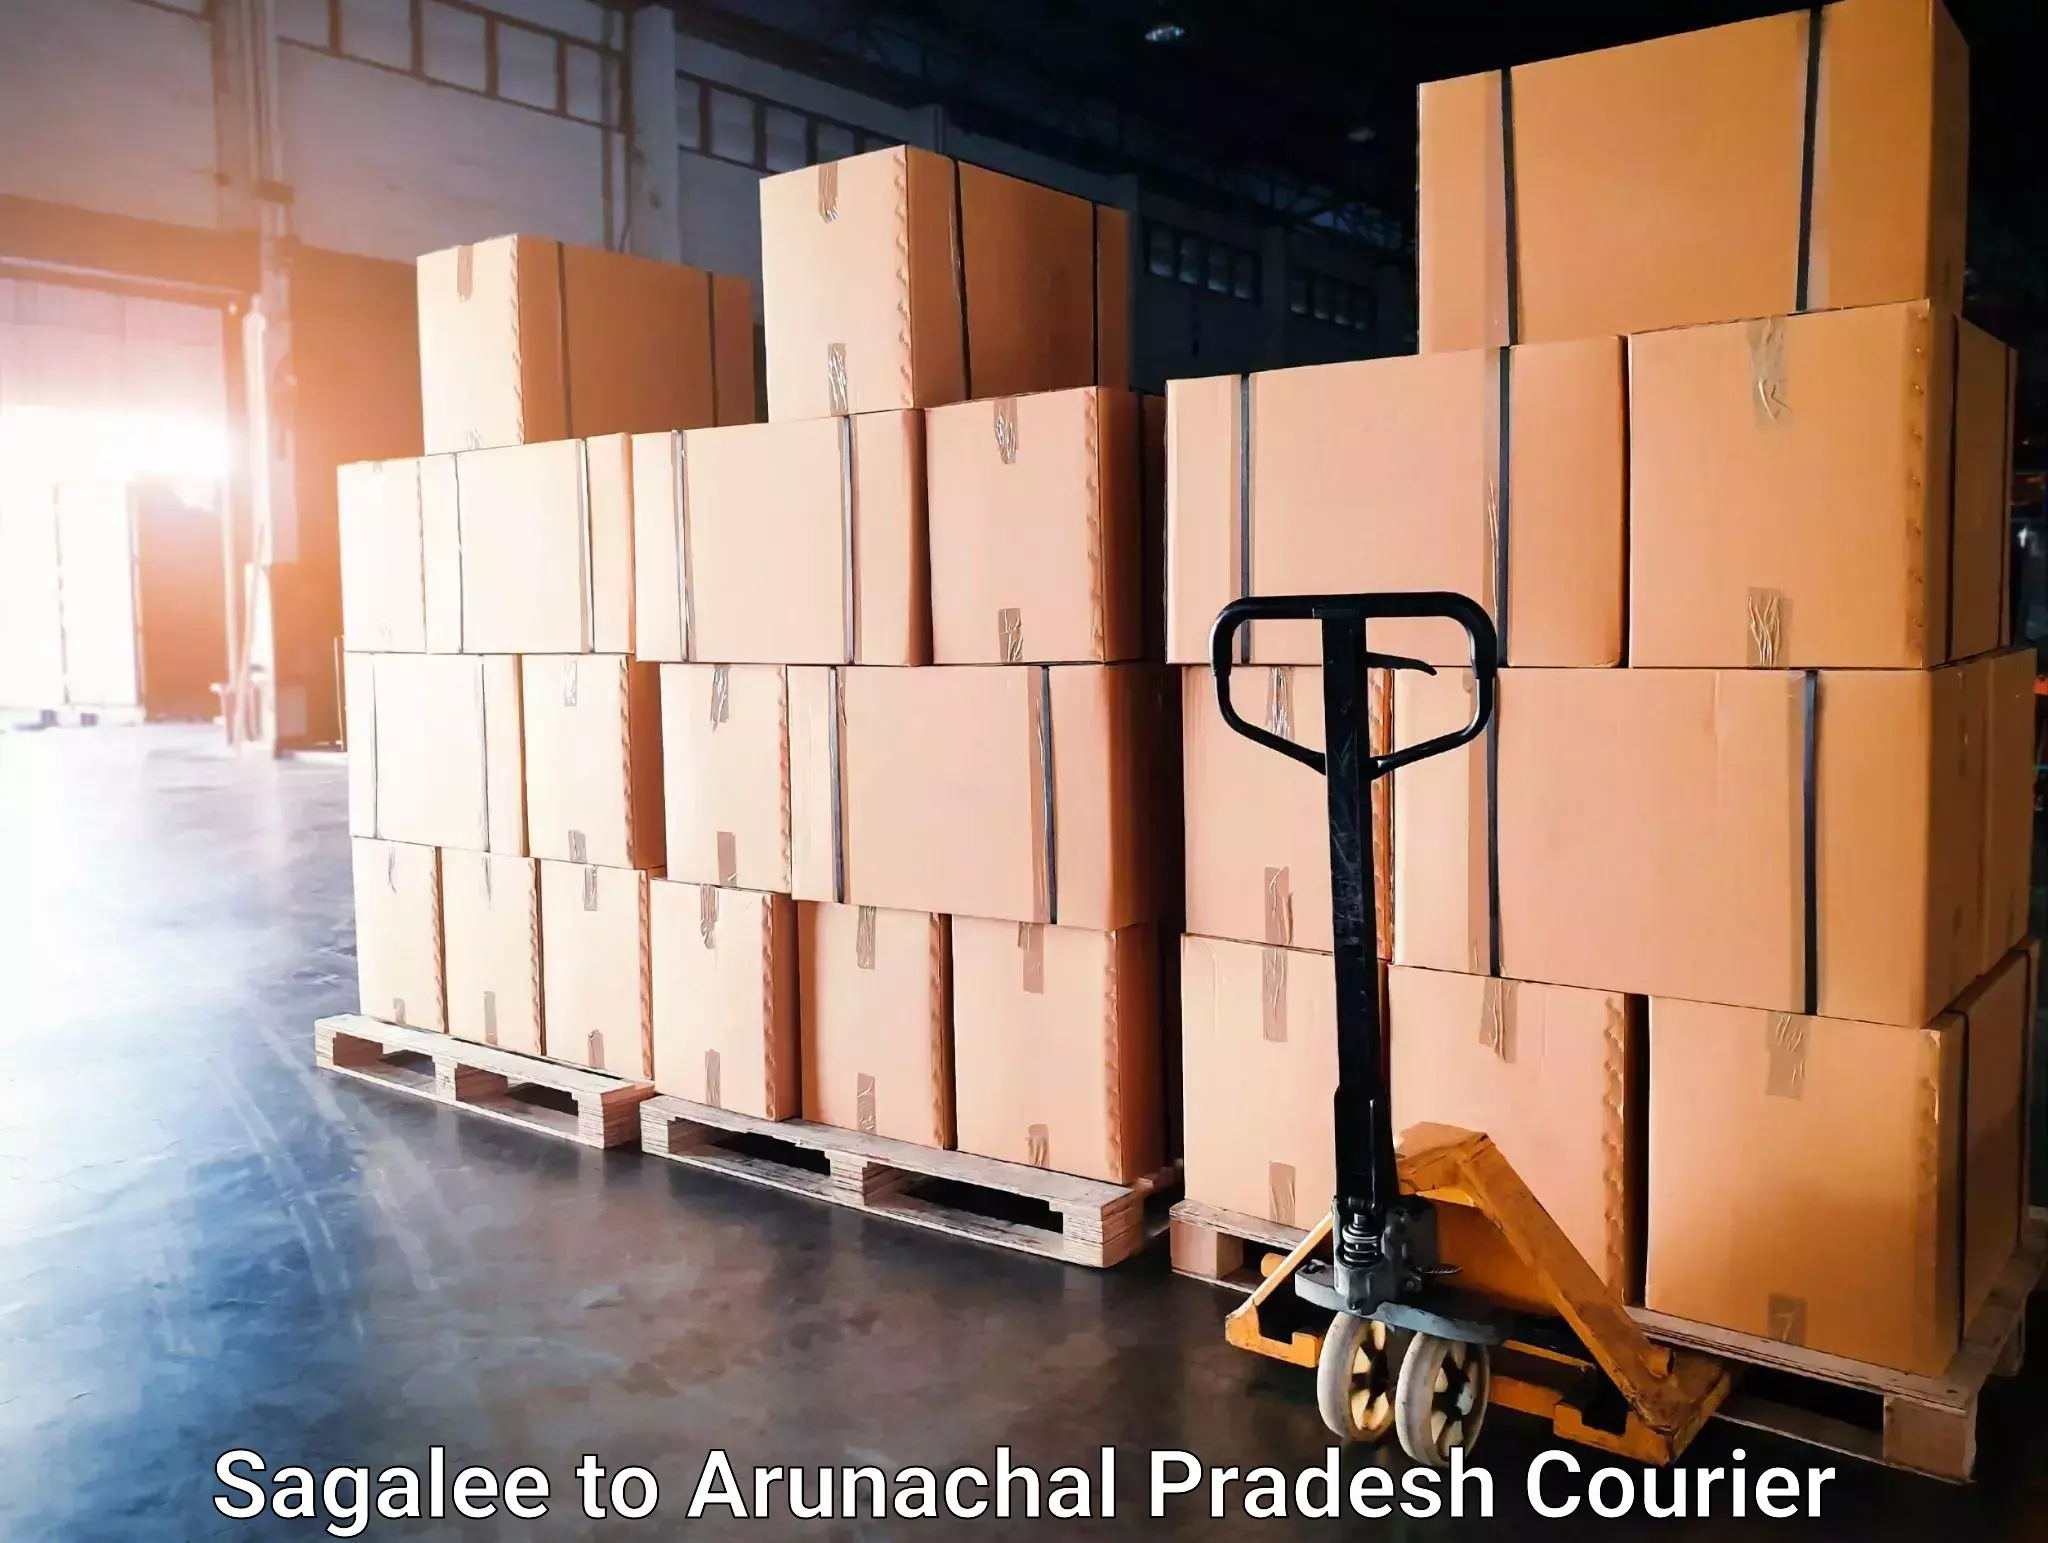 High-speed parcel service Sagalee to Dirang